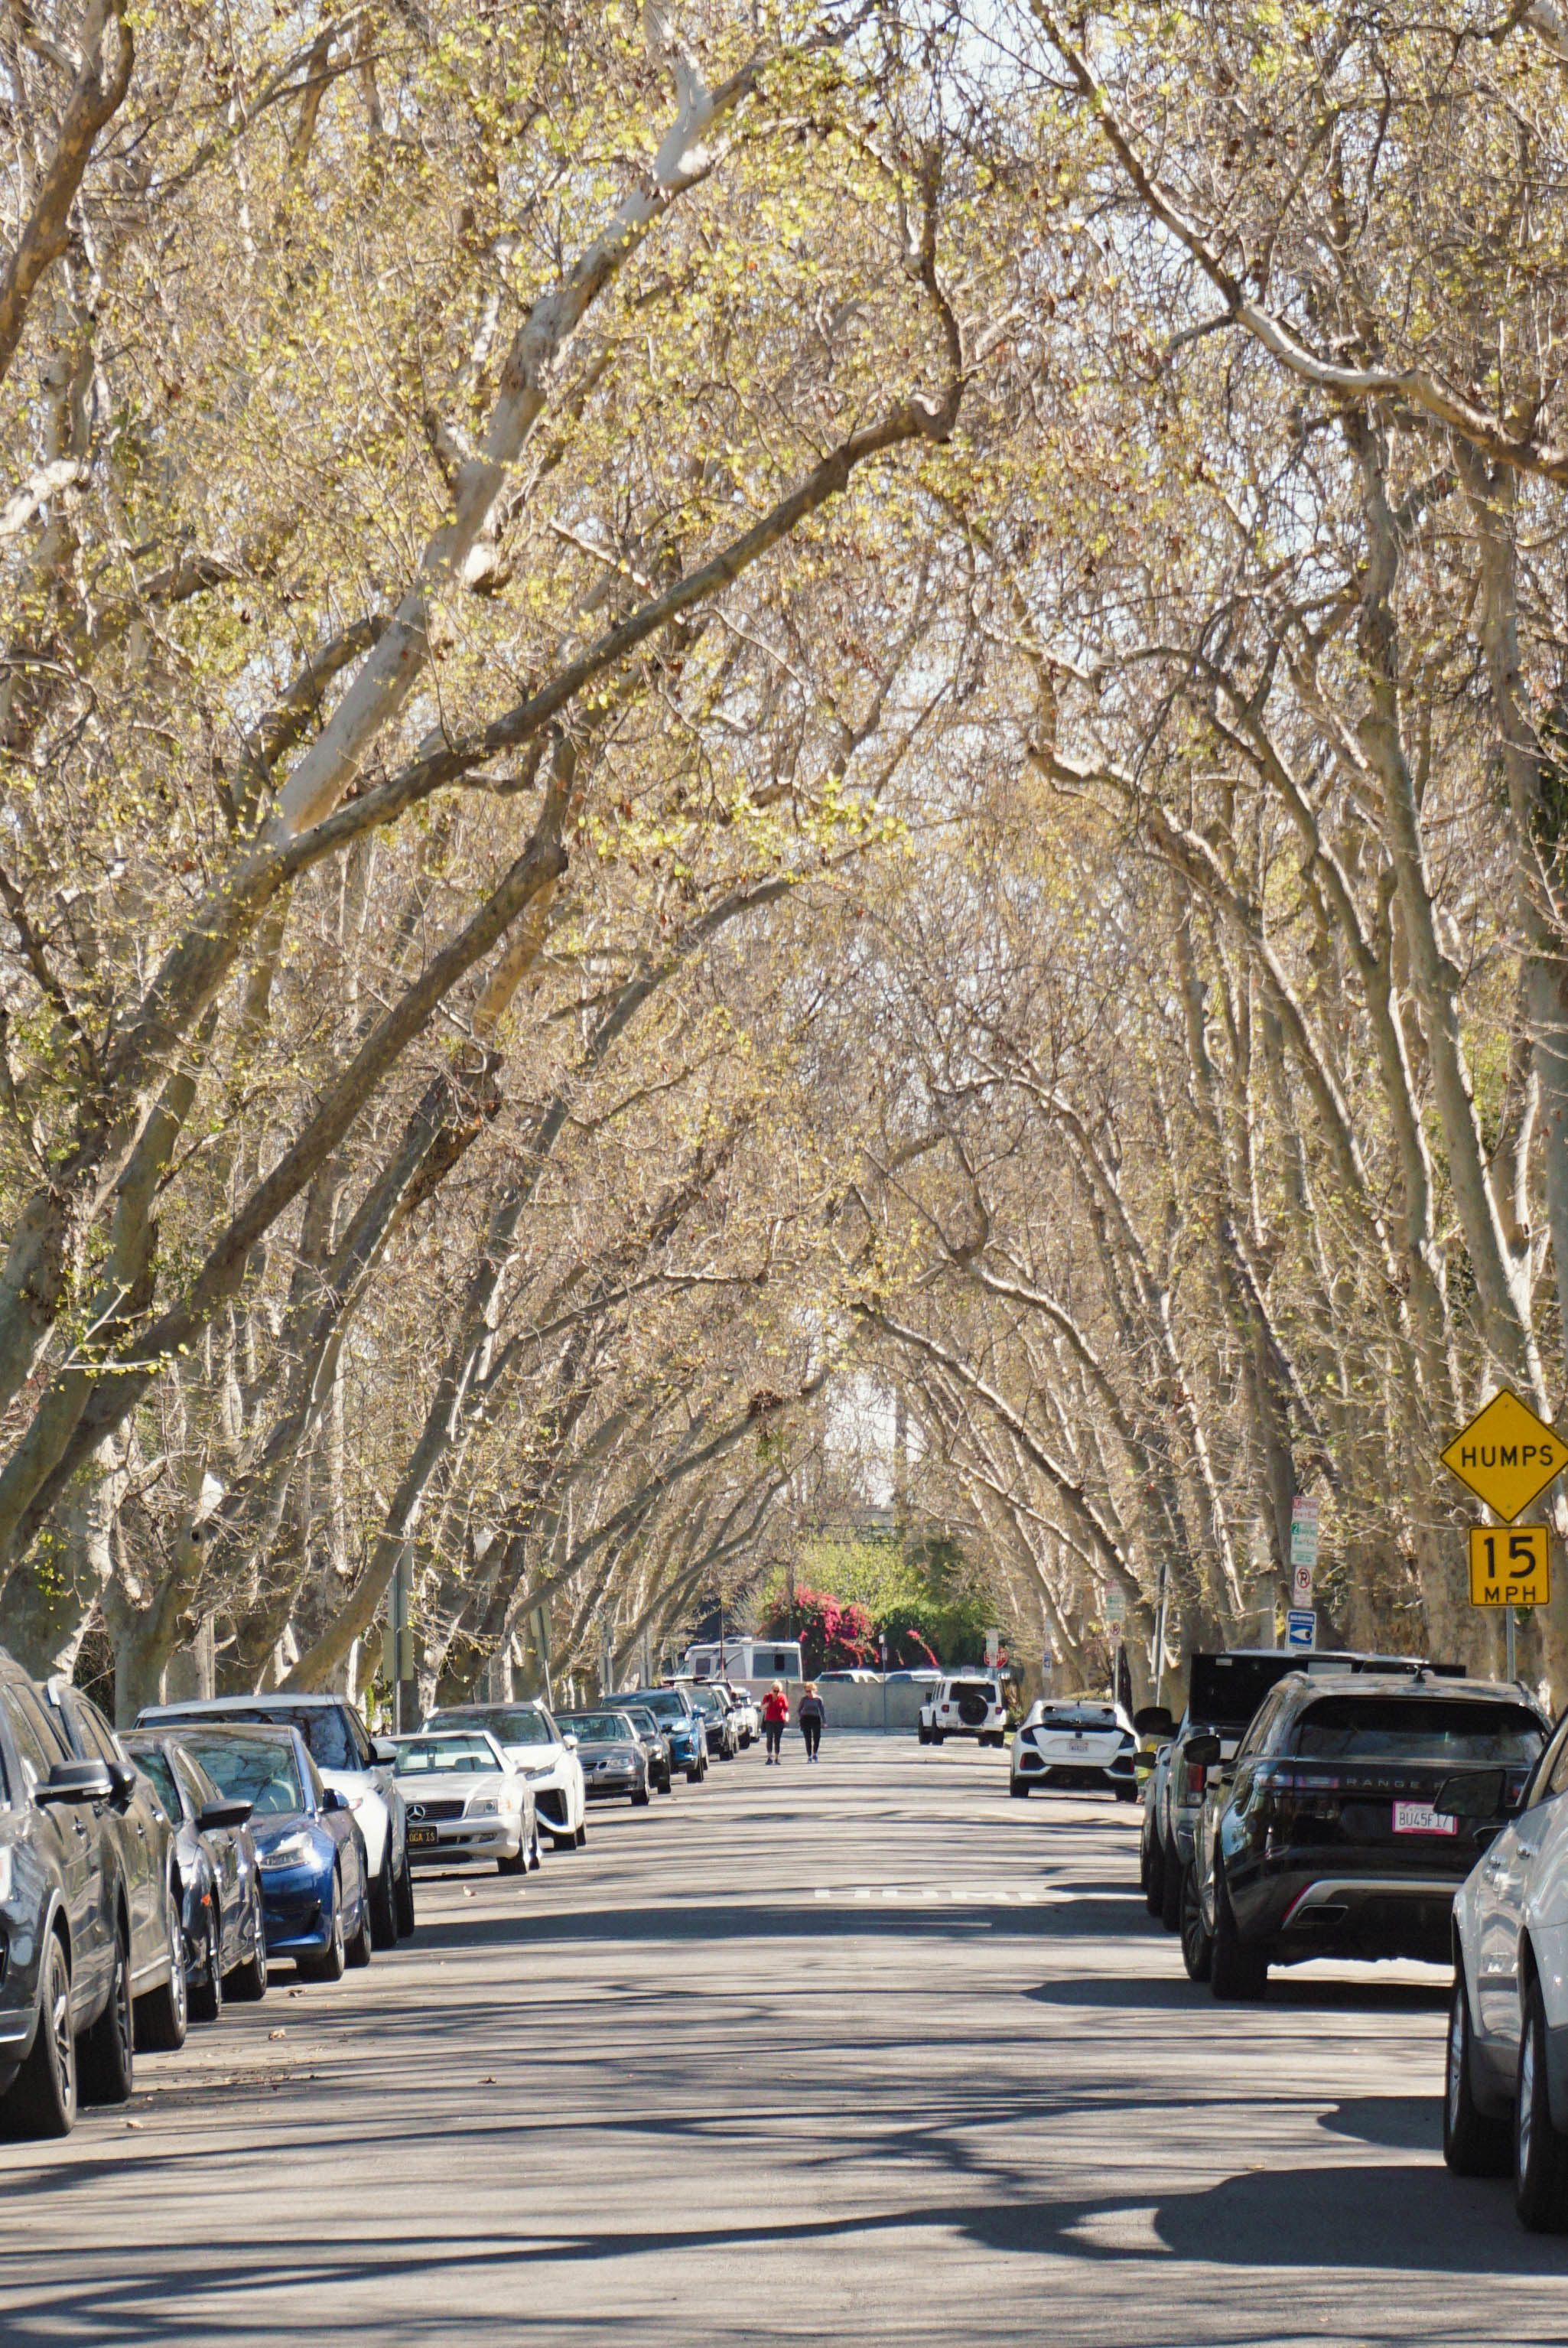 Bare sycamore trees line a residential street